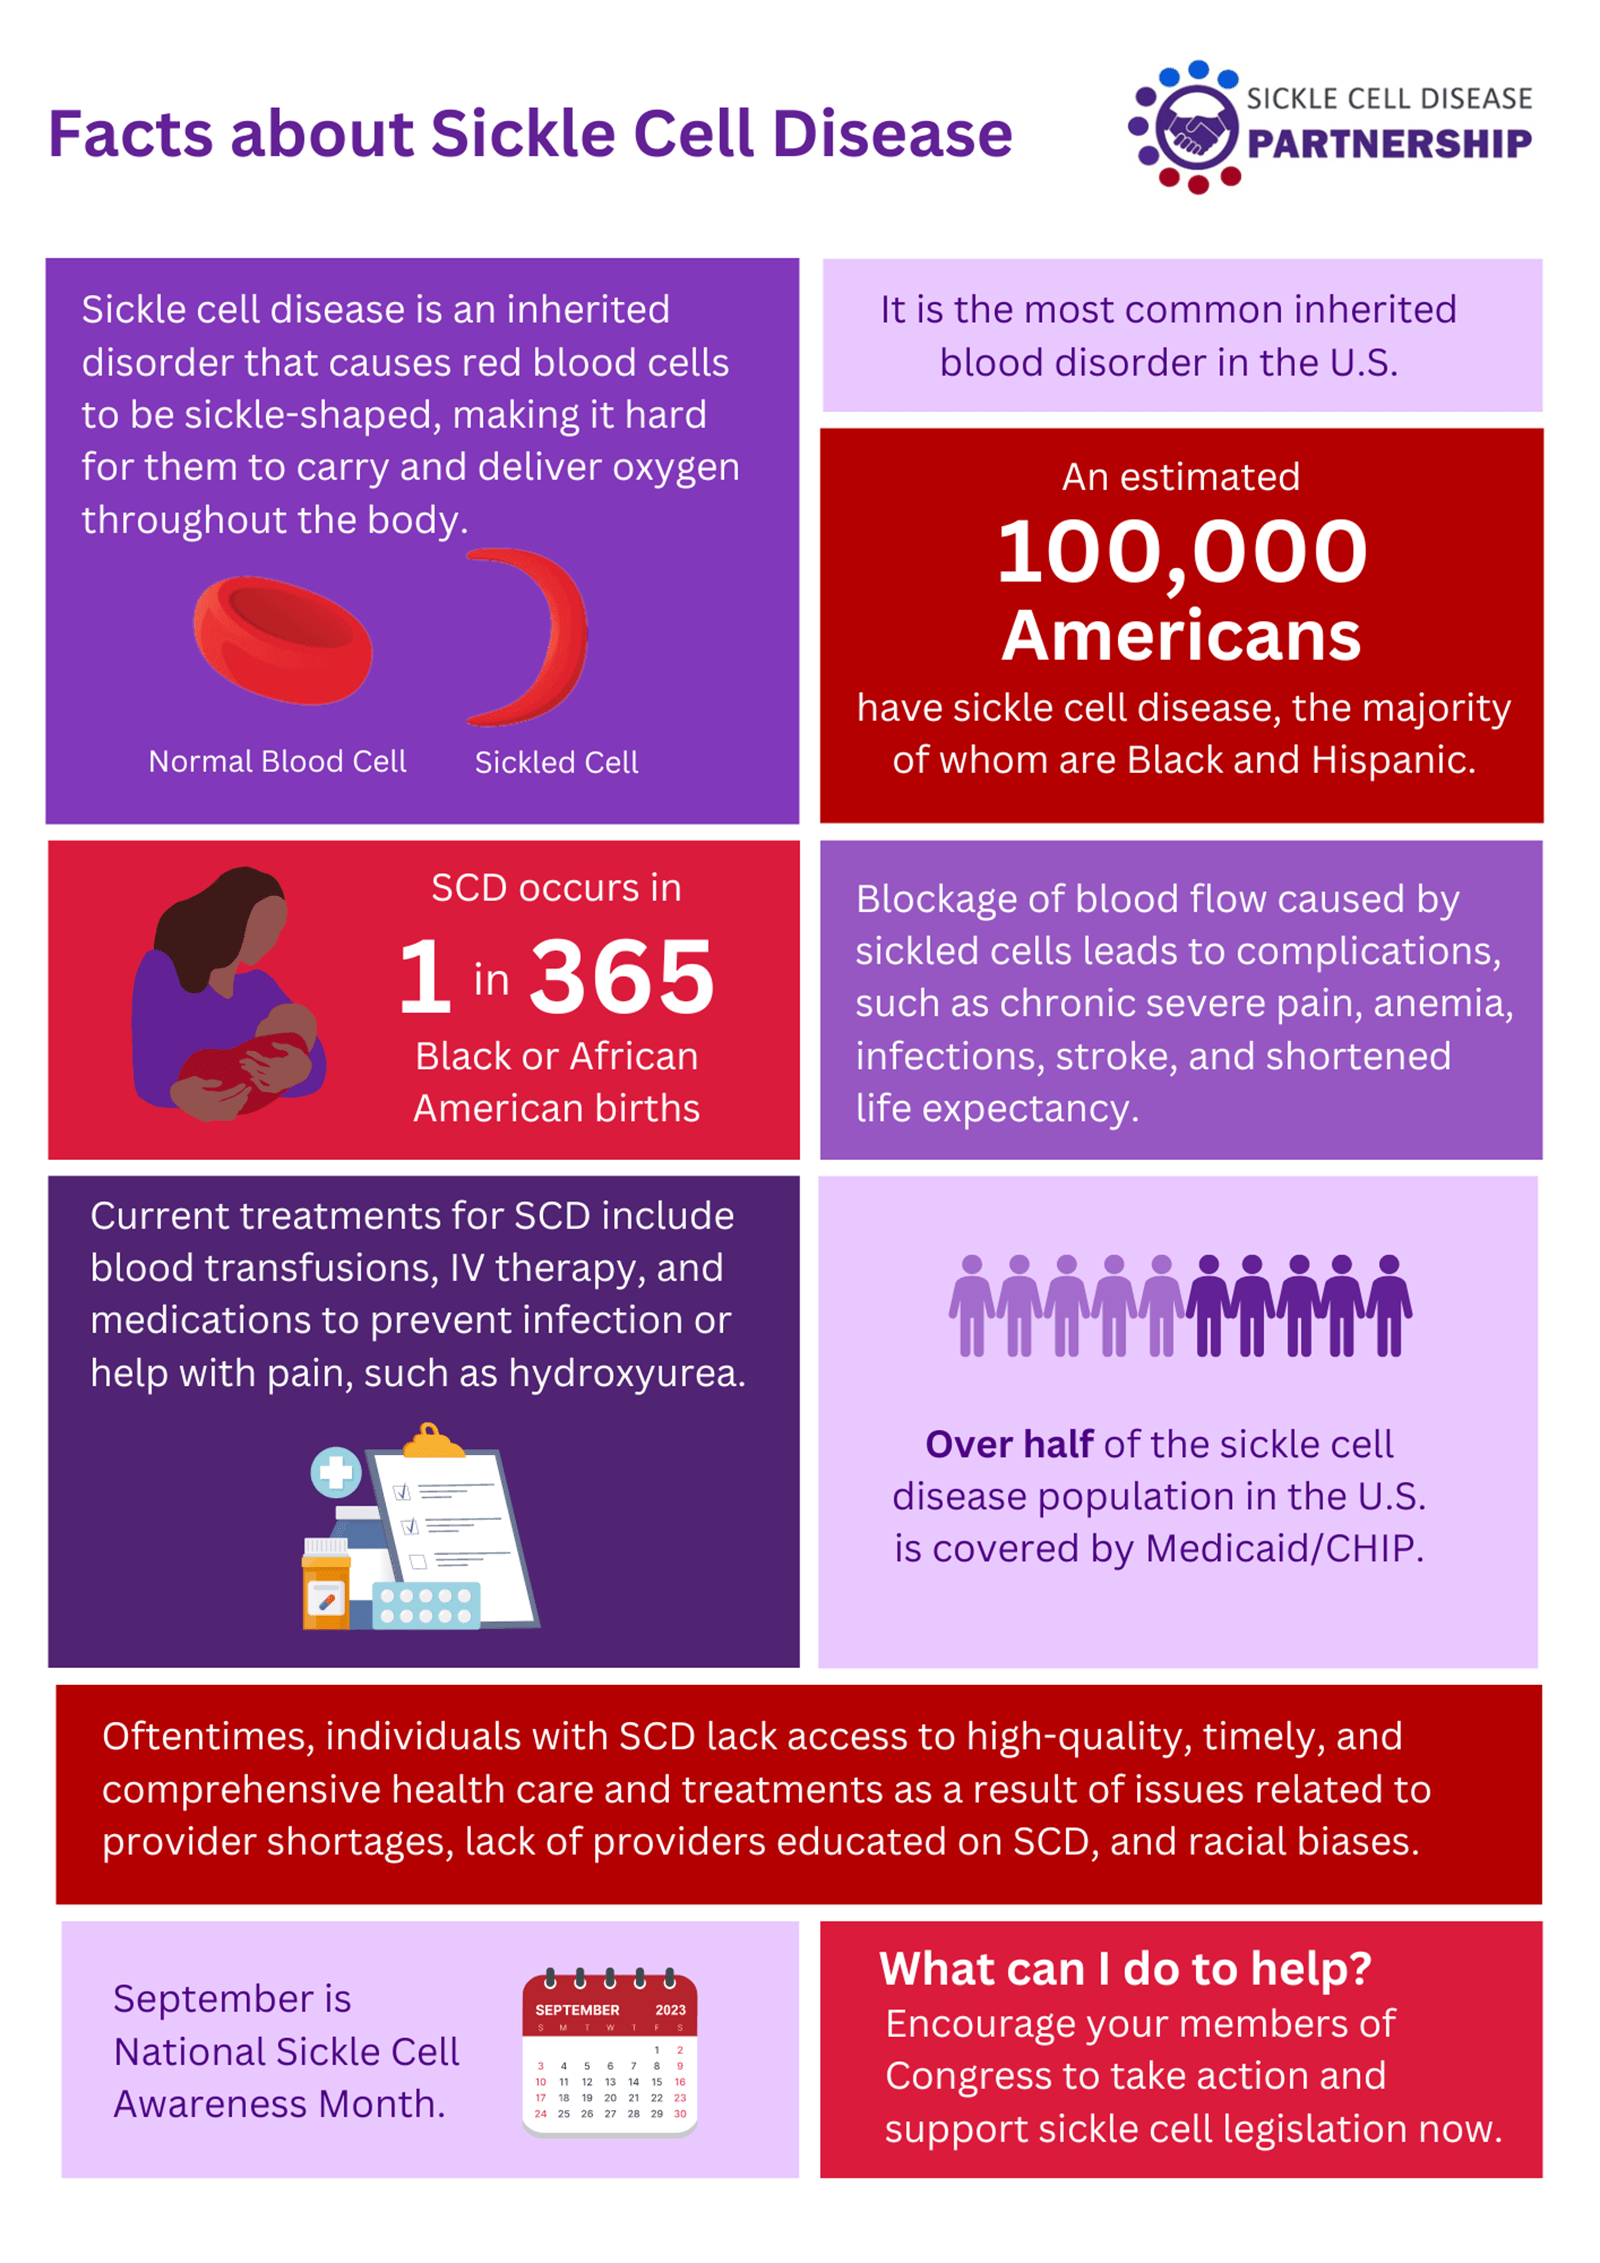 September is U.S. Sickle Cell Disease Awareness Month